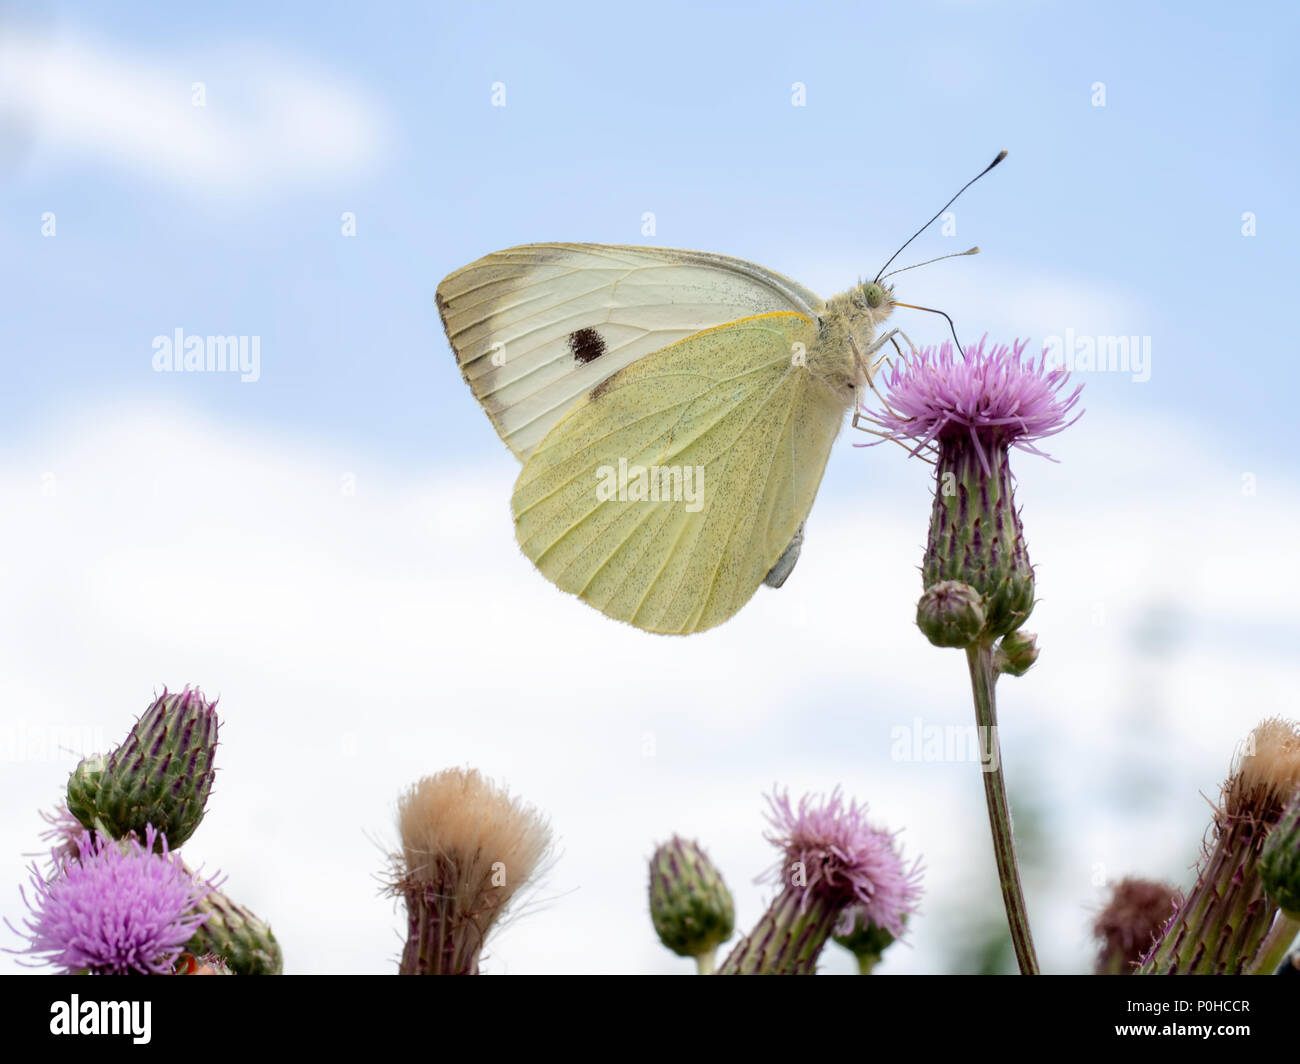 Pieris brassicae. Large cabbage white butterfly. Stock Photo